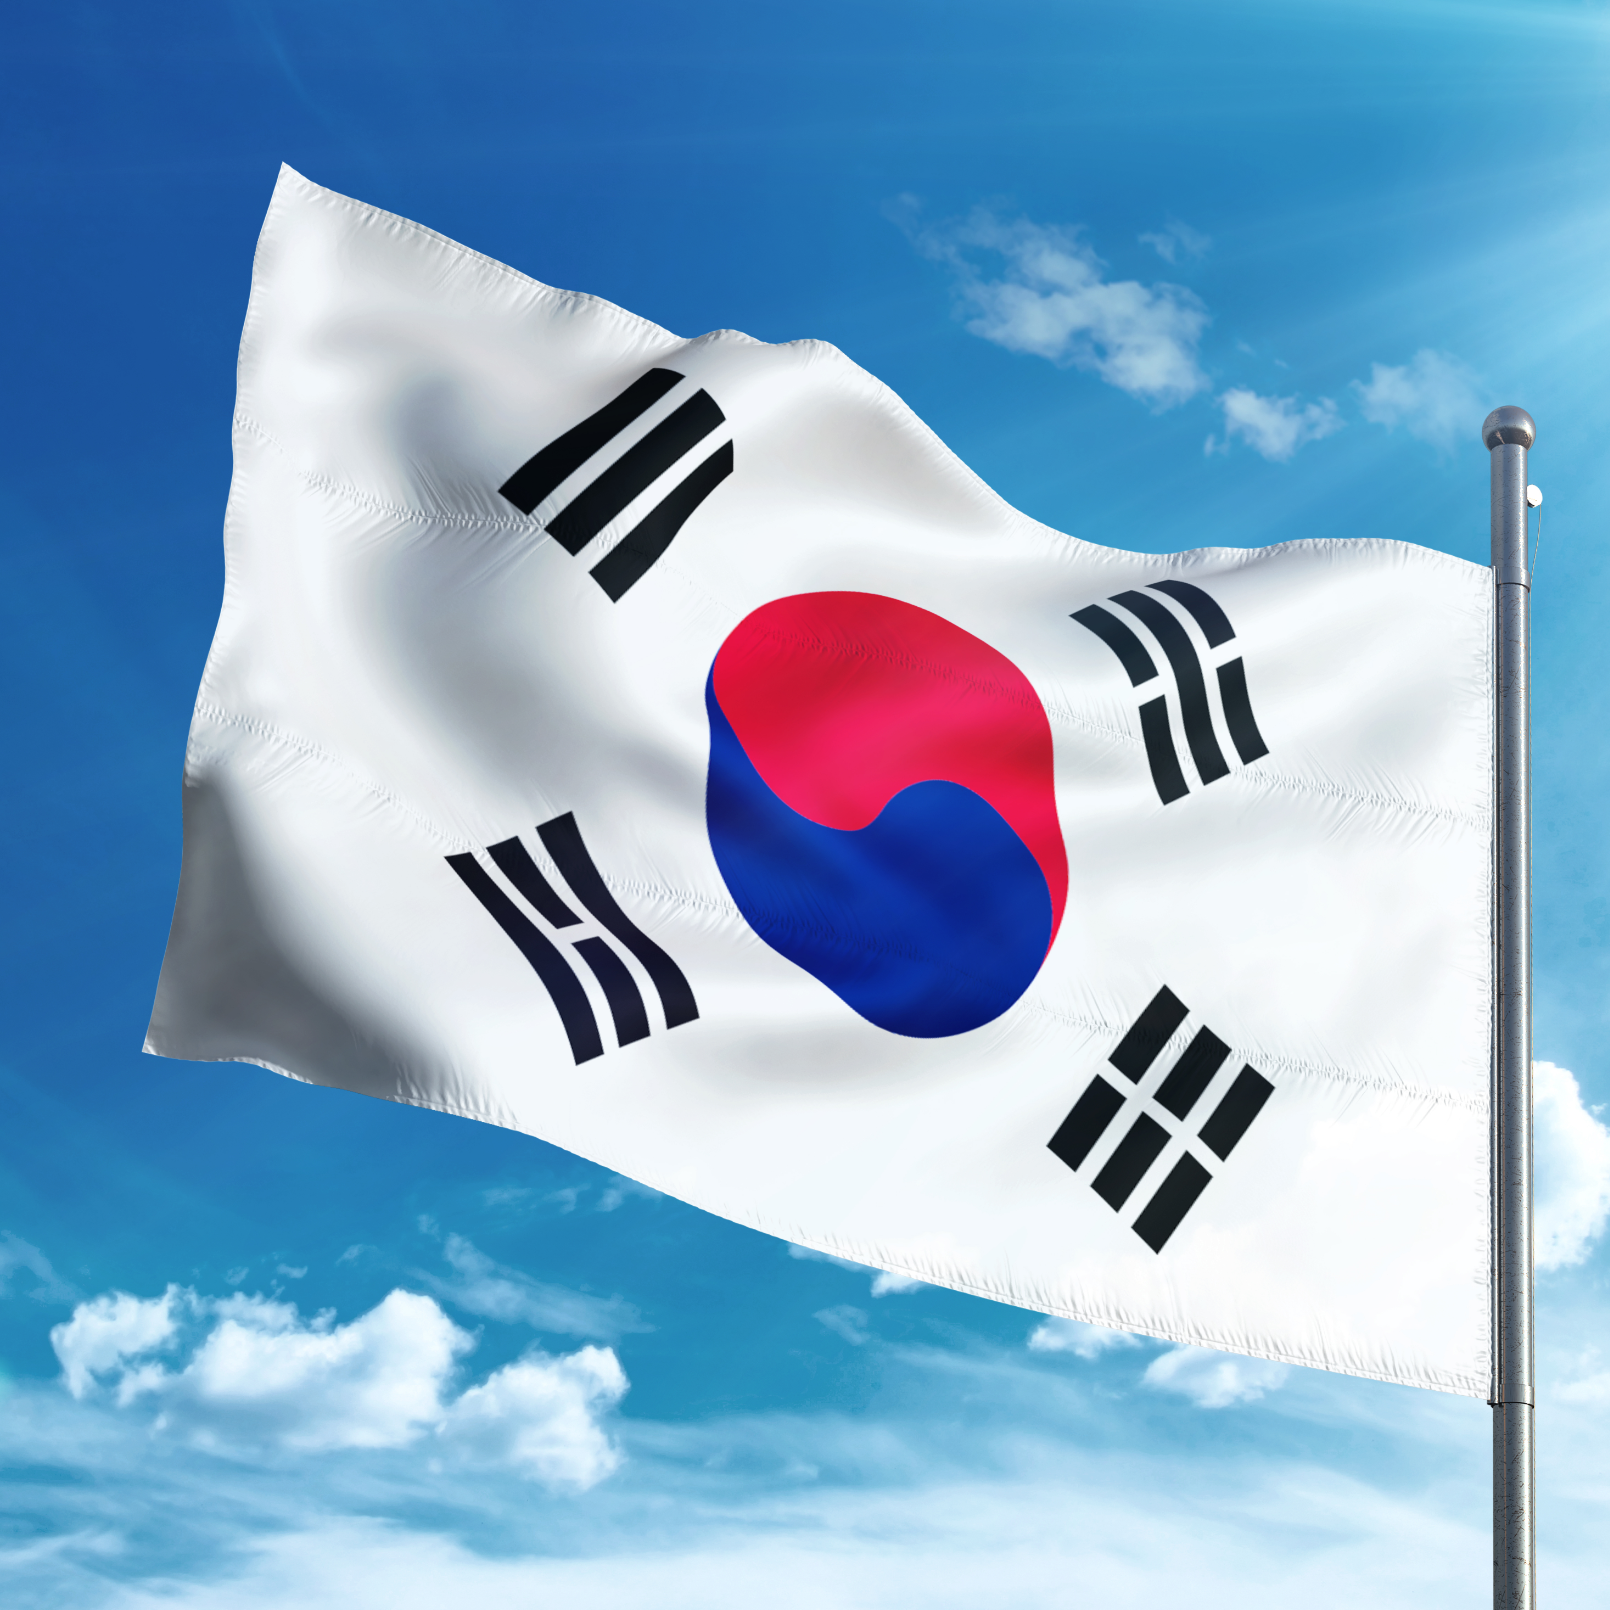 Crypto Still Tax Free in Korea but Regulators Have Set Timeframe for Taxation